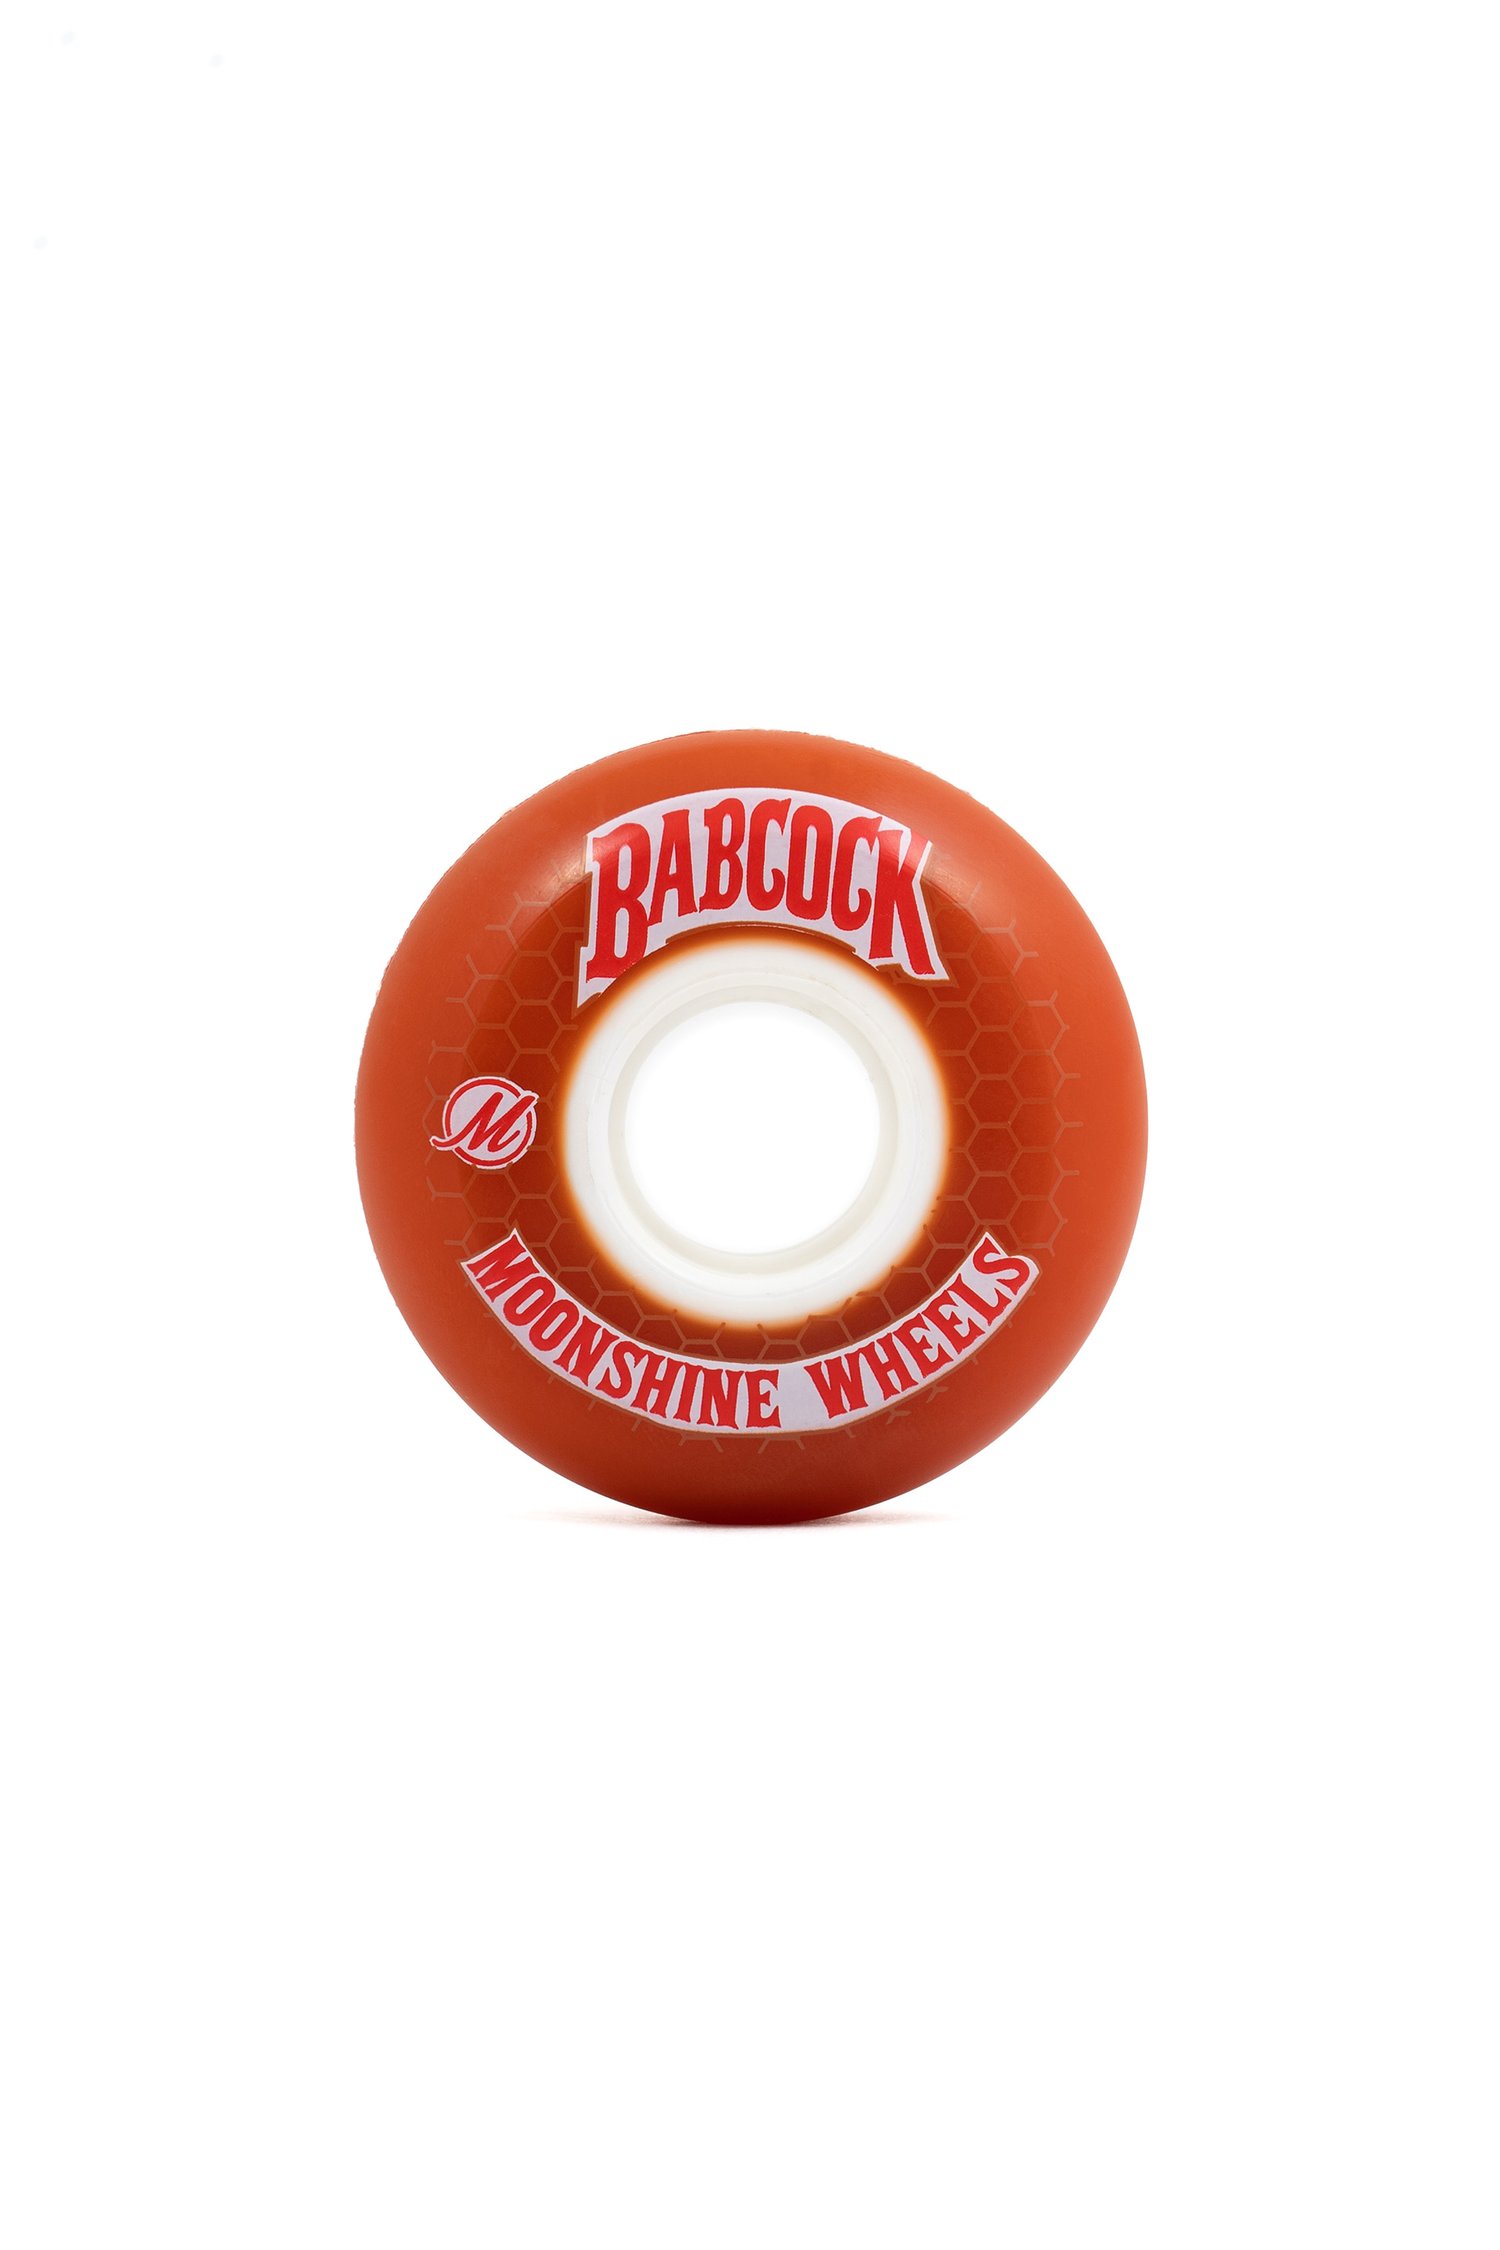 Image of Stephen Babcock Pro Wheel - 4 Pack - 60mm/90a